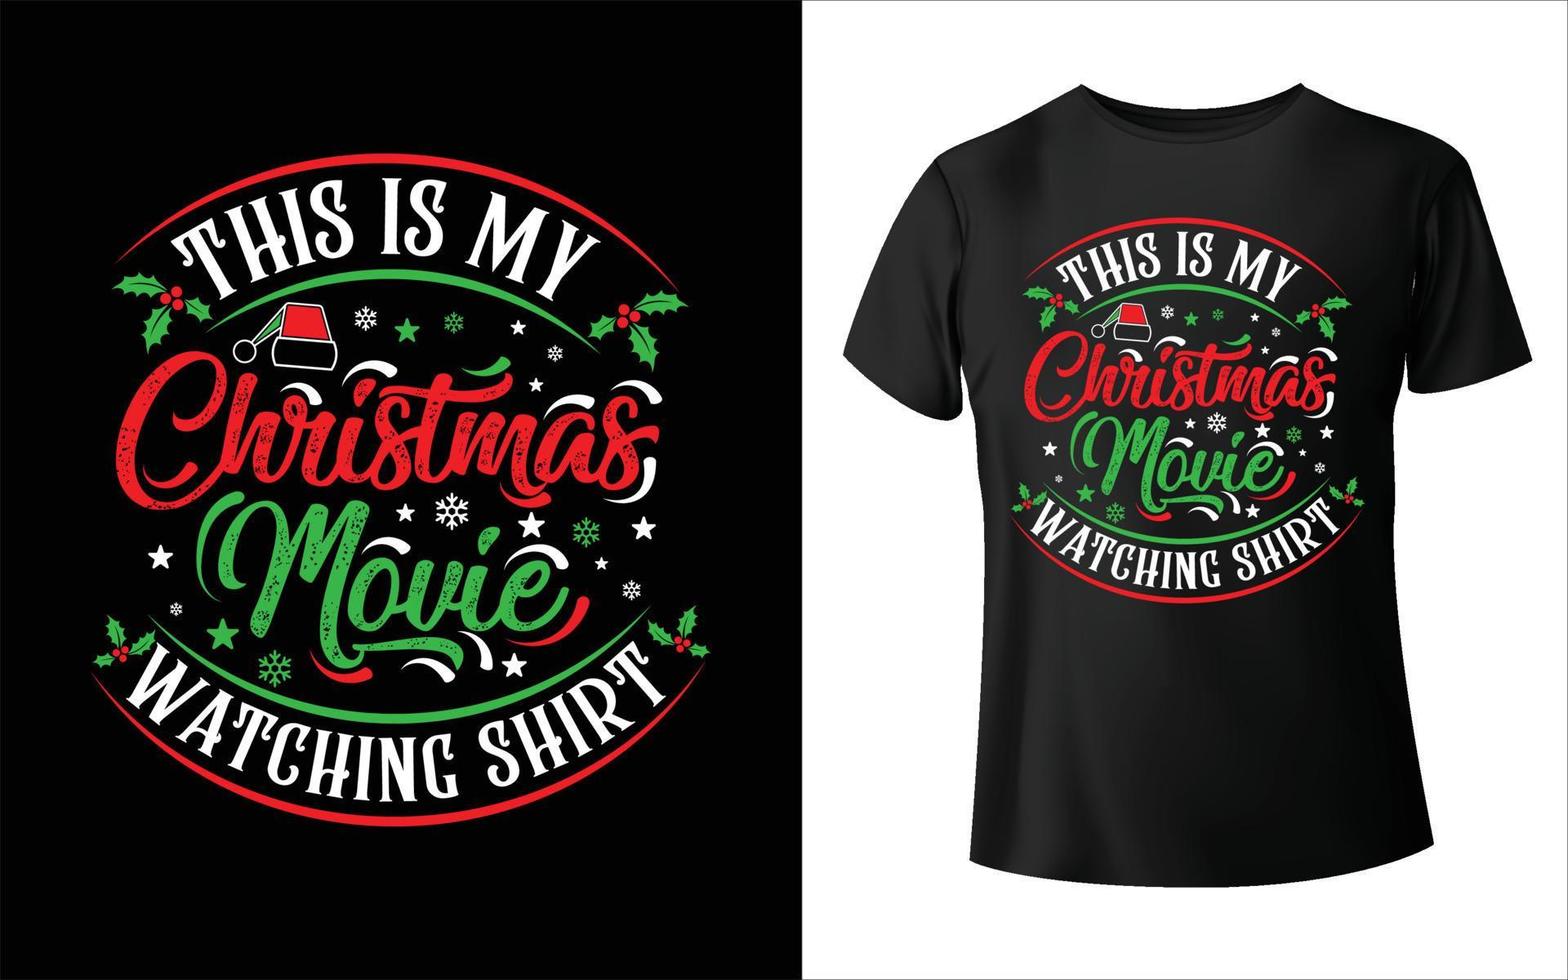 This is my christmas movie watching t-shirt design - Vector graphic, typographic poster, vintage, label, badge, logo, icon or t-shirt